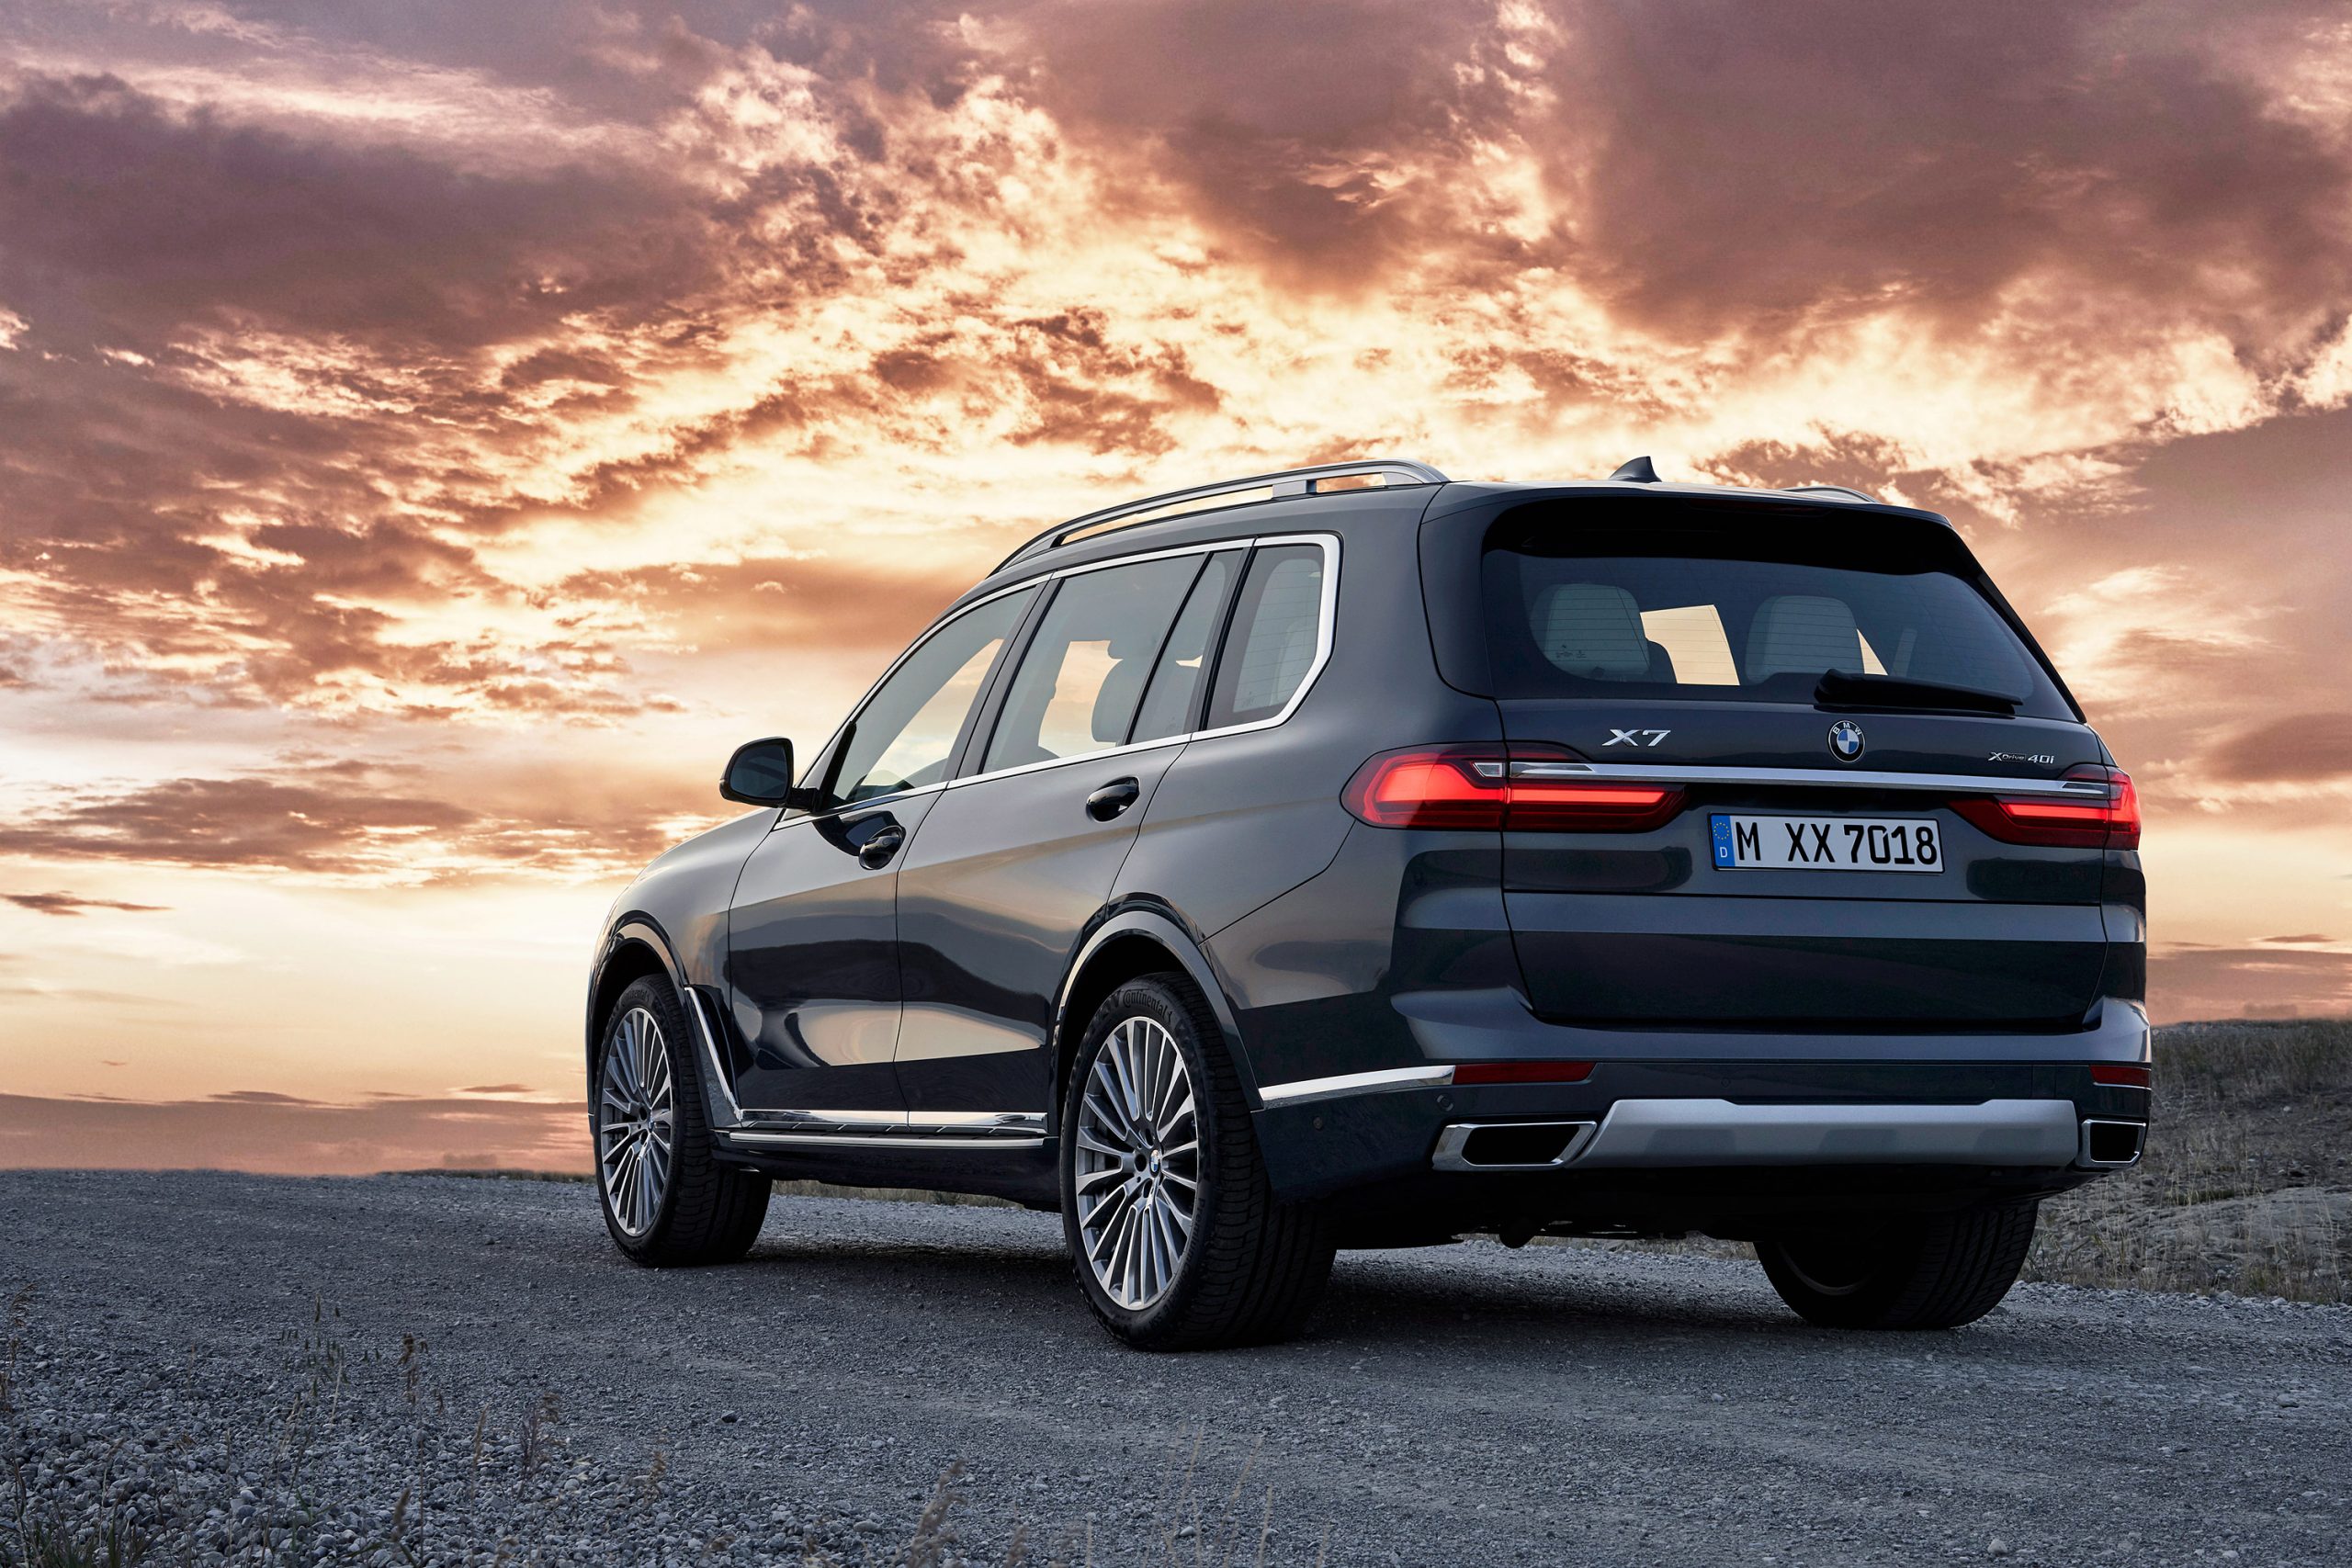 Bmw X7 Wallpapers